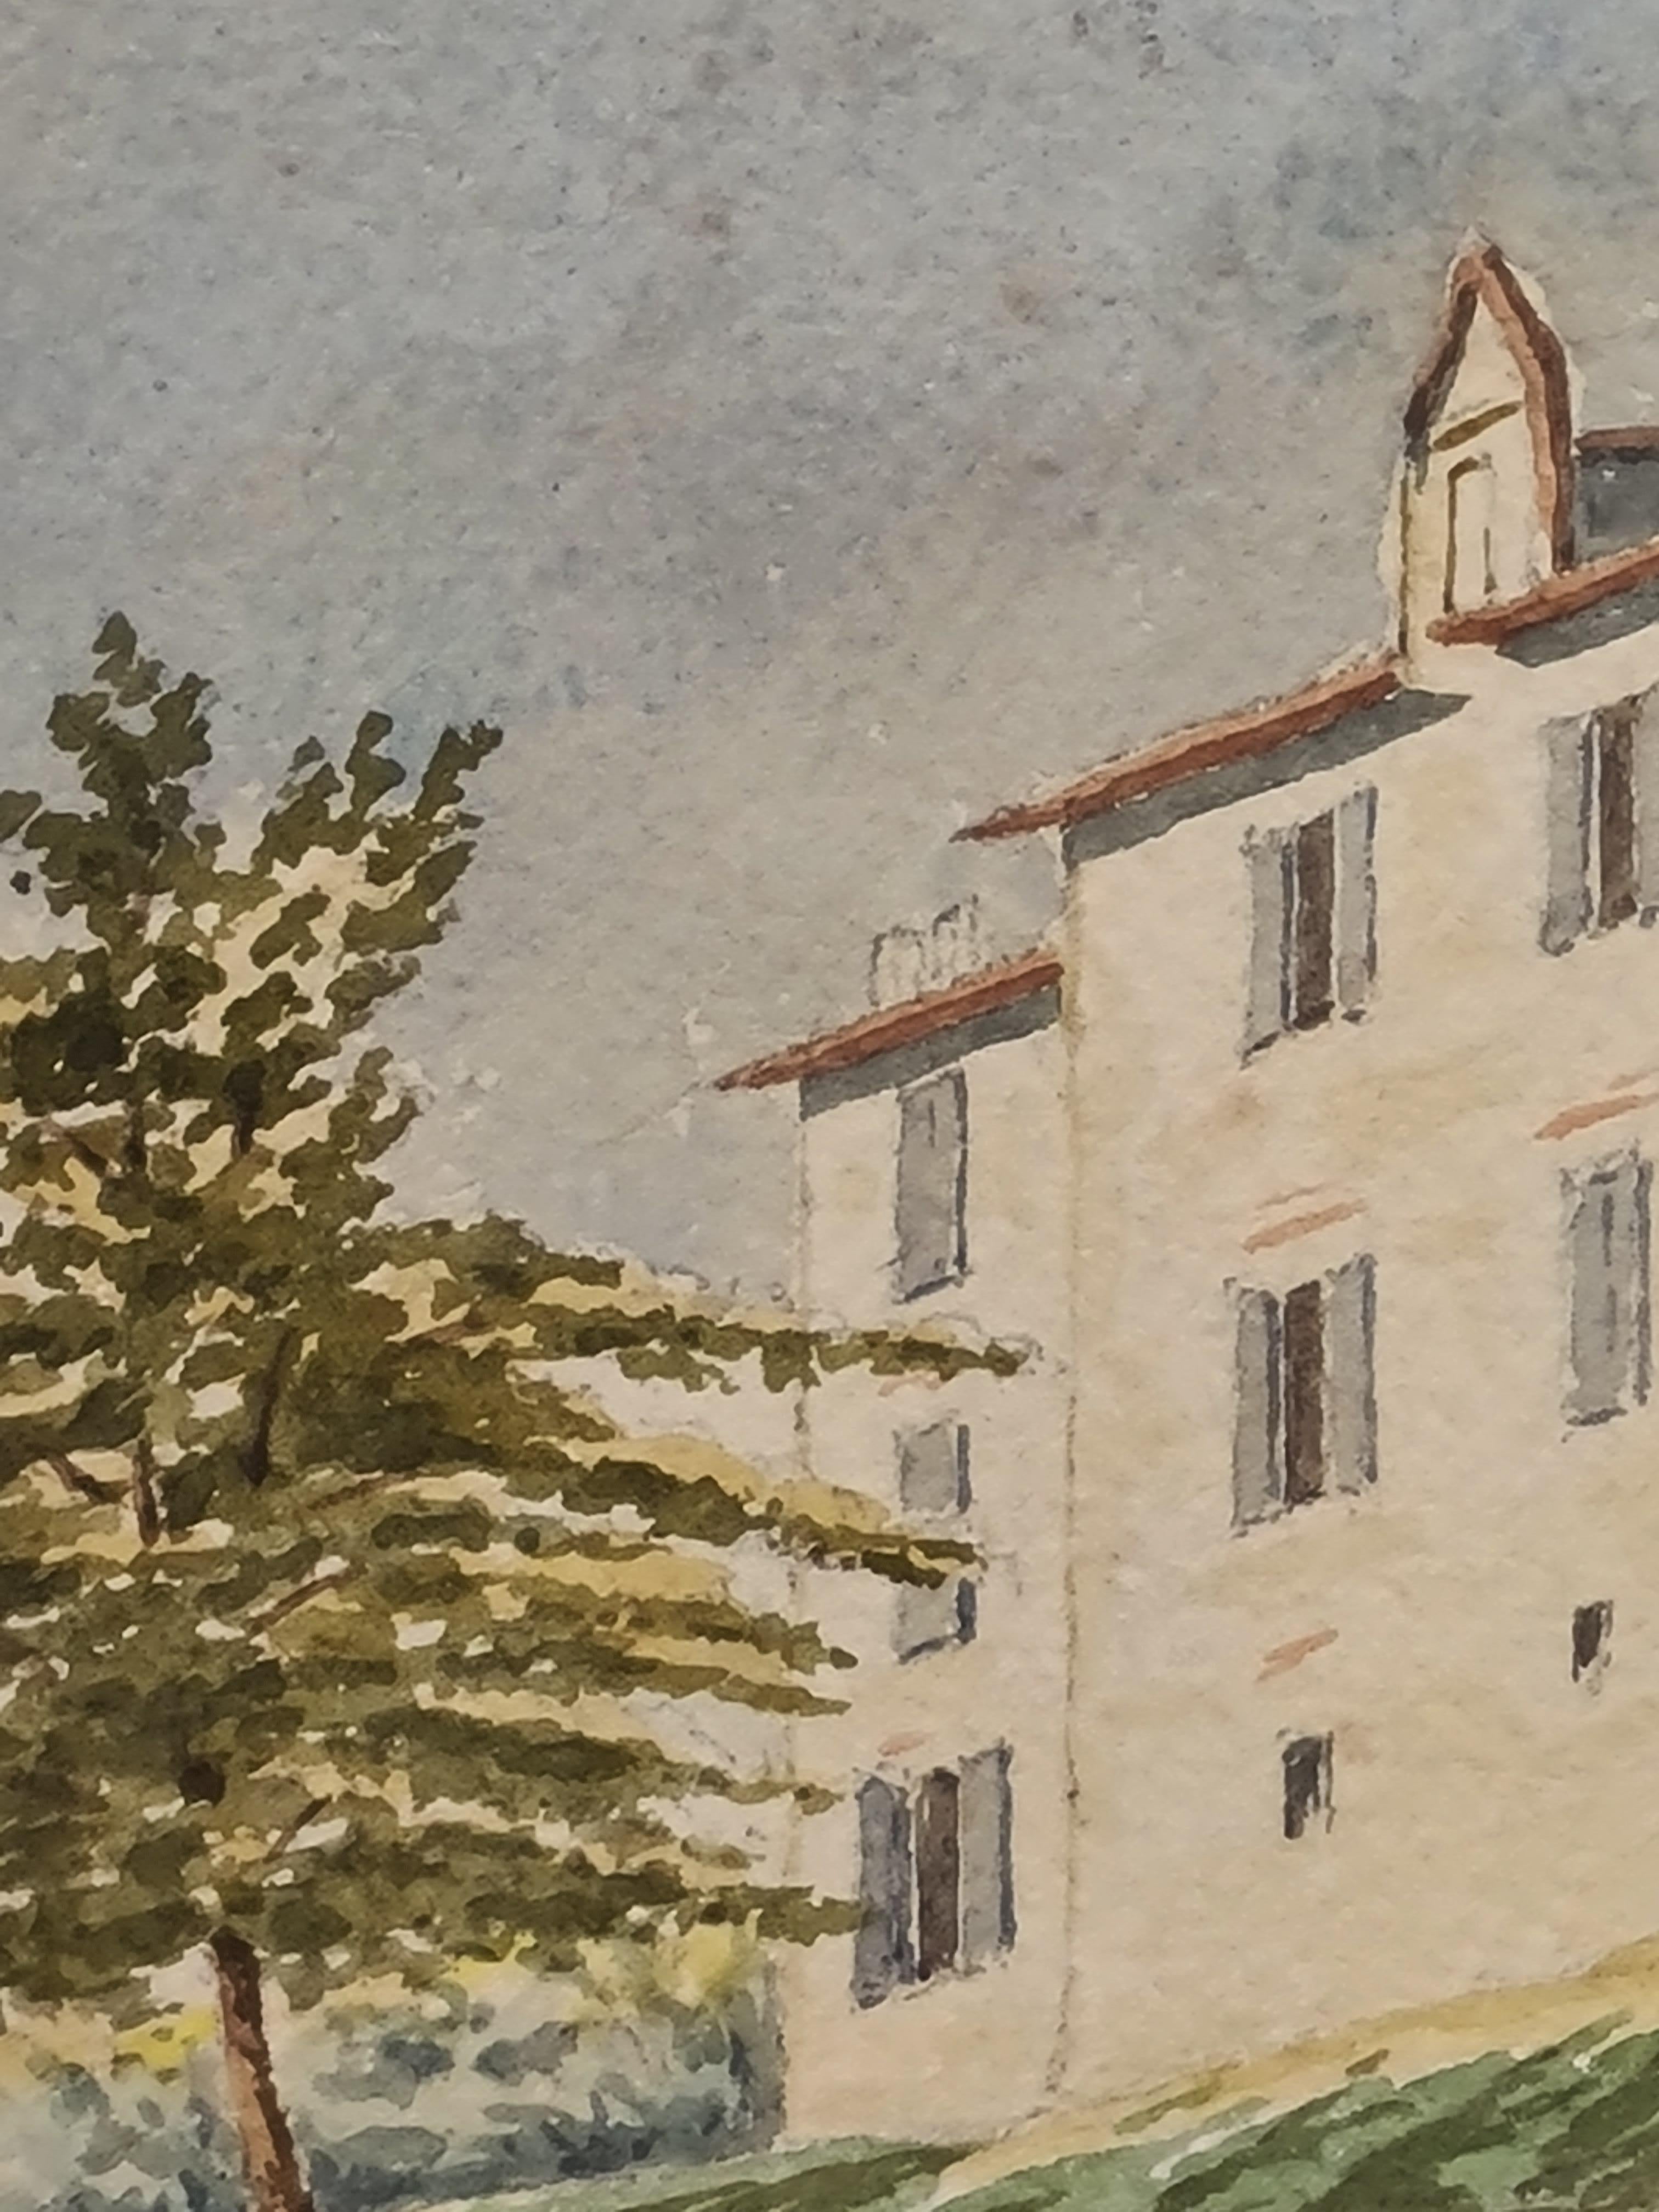 French Barbizon School watercolour on paper view of a chateau in a park by Henri Clamen. The painting is not signed but was acquired from the artist's atelier with other signed paintings.

A charming view of an imposing chateau sitting in the